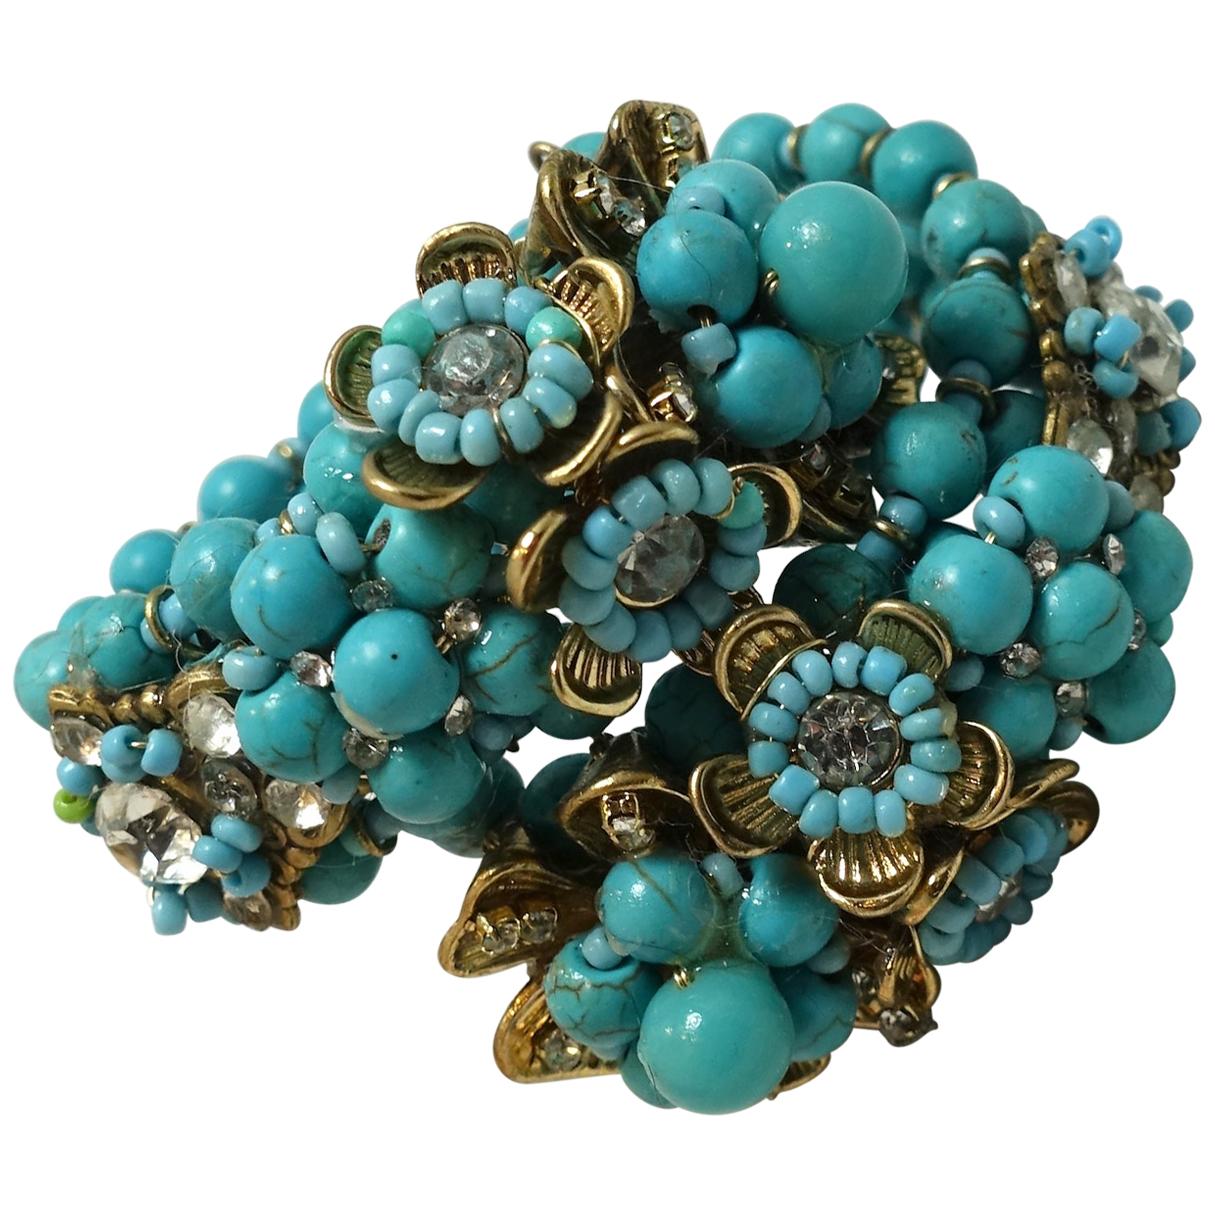 Vintage Miriam Haskell Turquoise Color Glass Beads & Crystal Wrap Bracelet For Sale